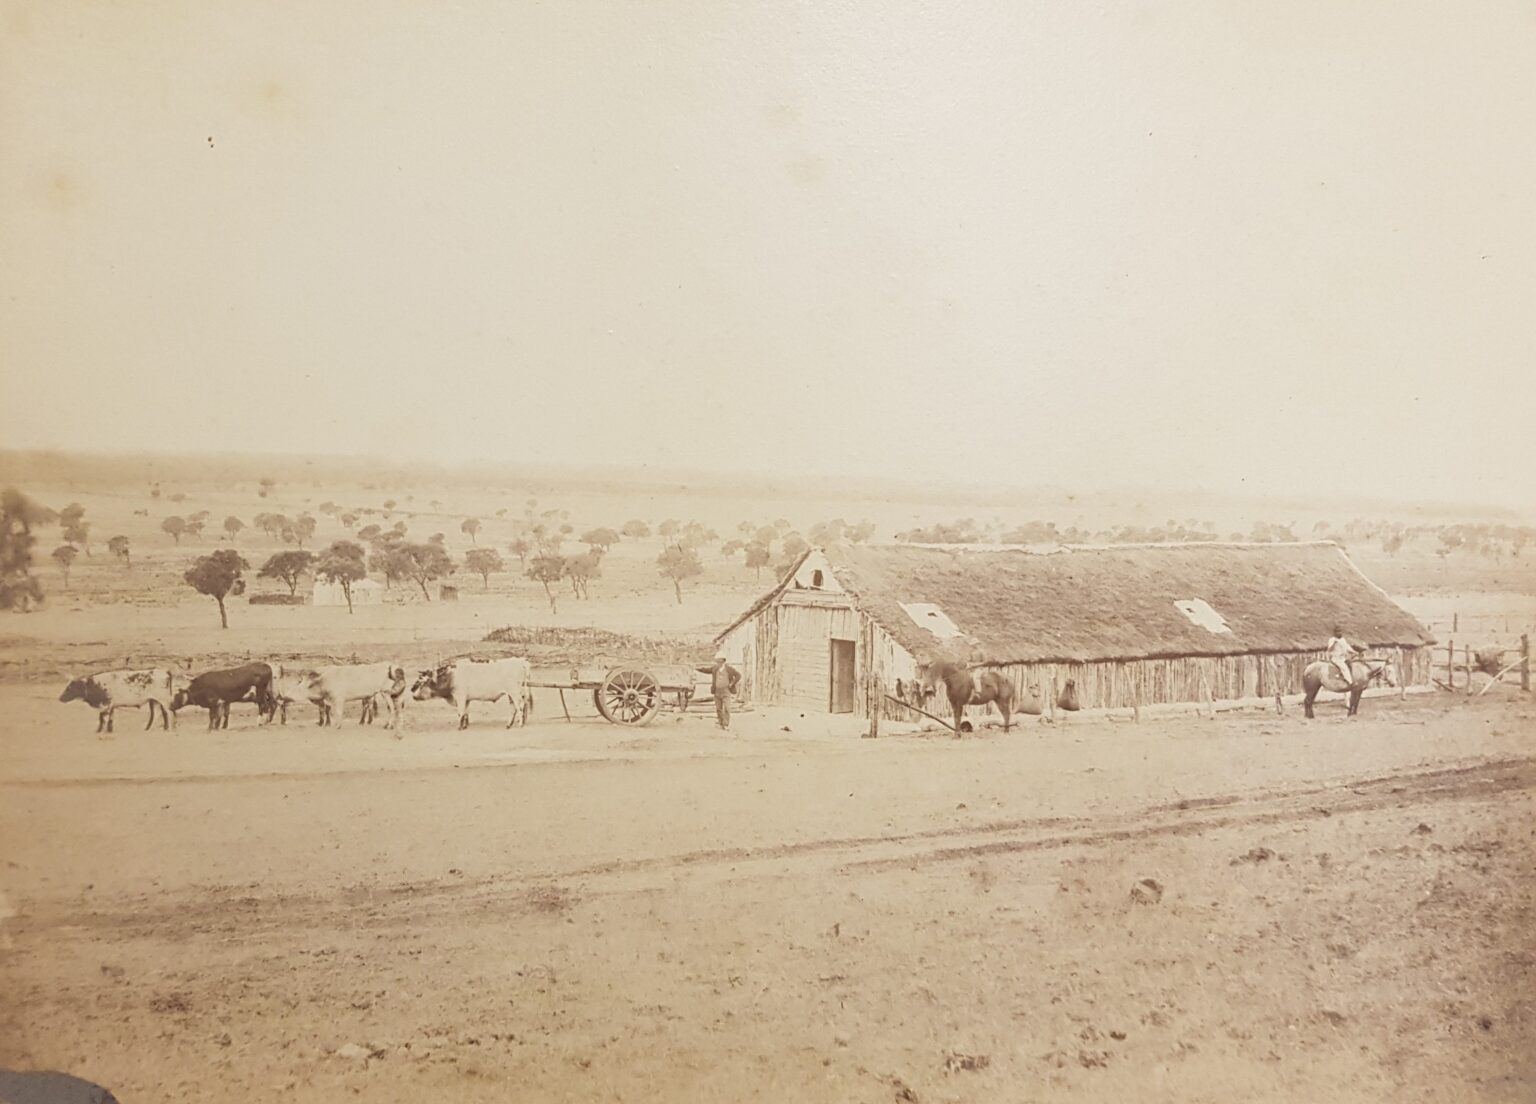 Figure 2: Dated to the 1850s, this image captures what is believed to be the original woolshed at Anlaby. Source: SLSA PRG 396/233/18. With permission from the Dutton family.